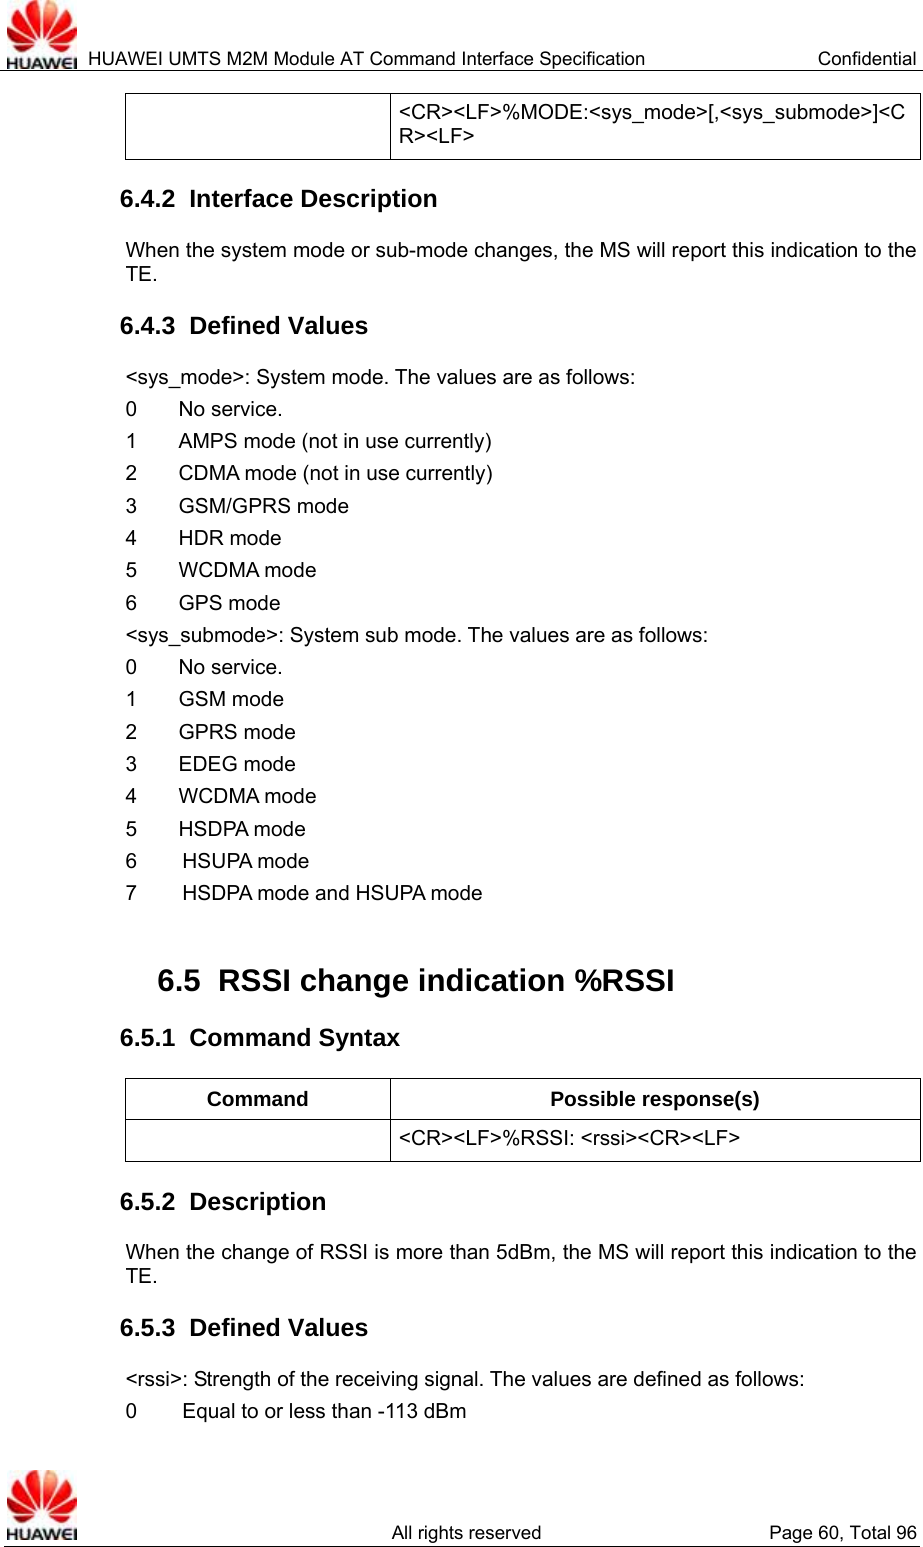  HUAWEI UMTS M2M Module AT Command Interface Specification  Confidential   All rights reserved  Page 60, Total 96  &lt;CR&gt;&lt;LF&gt;%MODE:&lt;sys_mode&gt;[,&lt;sys_submode&gt;]&lt;CR&gt;&lt;LF&gt; 6.4.2  Interface Description When the system mode or sub-mode changes, the MS will report this indication to the TE.  6.4.3  Defined Values &lt;sys_mode&gt;: System mode. The values are as follows:   0    No service.  1    AMPS mode (not in use currently)  2    CDMA mode (not in use currently)  3    GSM/GPRS mode 4    HDR mode 5    WCDMA mode 6    GPS mode &lt;sys_submode&gt;: System sub mode. The values are as follows:   0    No service.  1    GSM mode  2    GPRS mode  3    EDEG mode 4    WCDMA mode 5    HSDPA mode 6   HSUPA  mode 7   HSDPA mode and HSUPA mode  6.5  RSSI change indication %RSSI   6.5.1  Command Syntax Command Possible response(s)  &lt;CR&gt;&lt;LF&gt;%RSSI: &lt;rssi&gt;&lt;CR&gt;&lt;LF&gt; 6.5.2  Description When the change of RSSI is more than 5dBm, the MS will report this indication to the TE.  6.5.3  Defined Values &lt;rssi&gt;: Strength of the receiving signal. The values are defined as follows:   0   Equal to or less than -113 dBm 